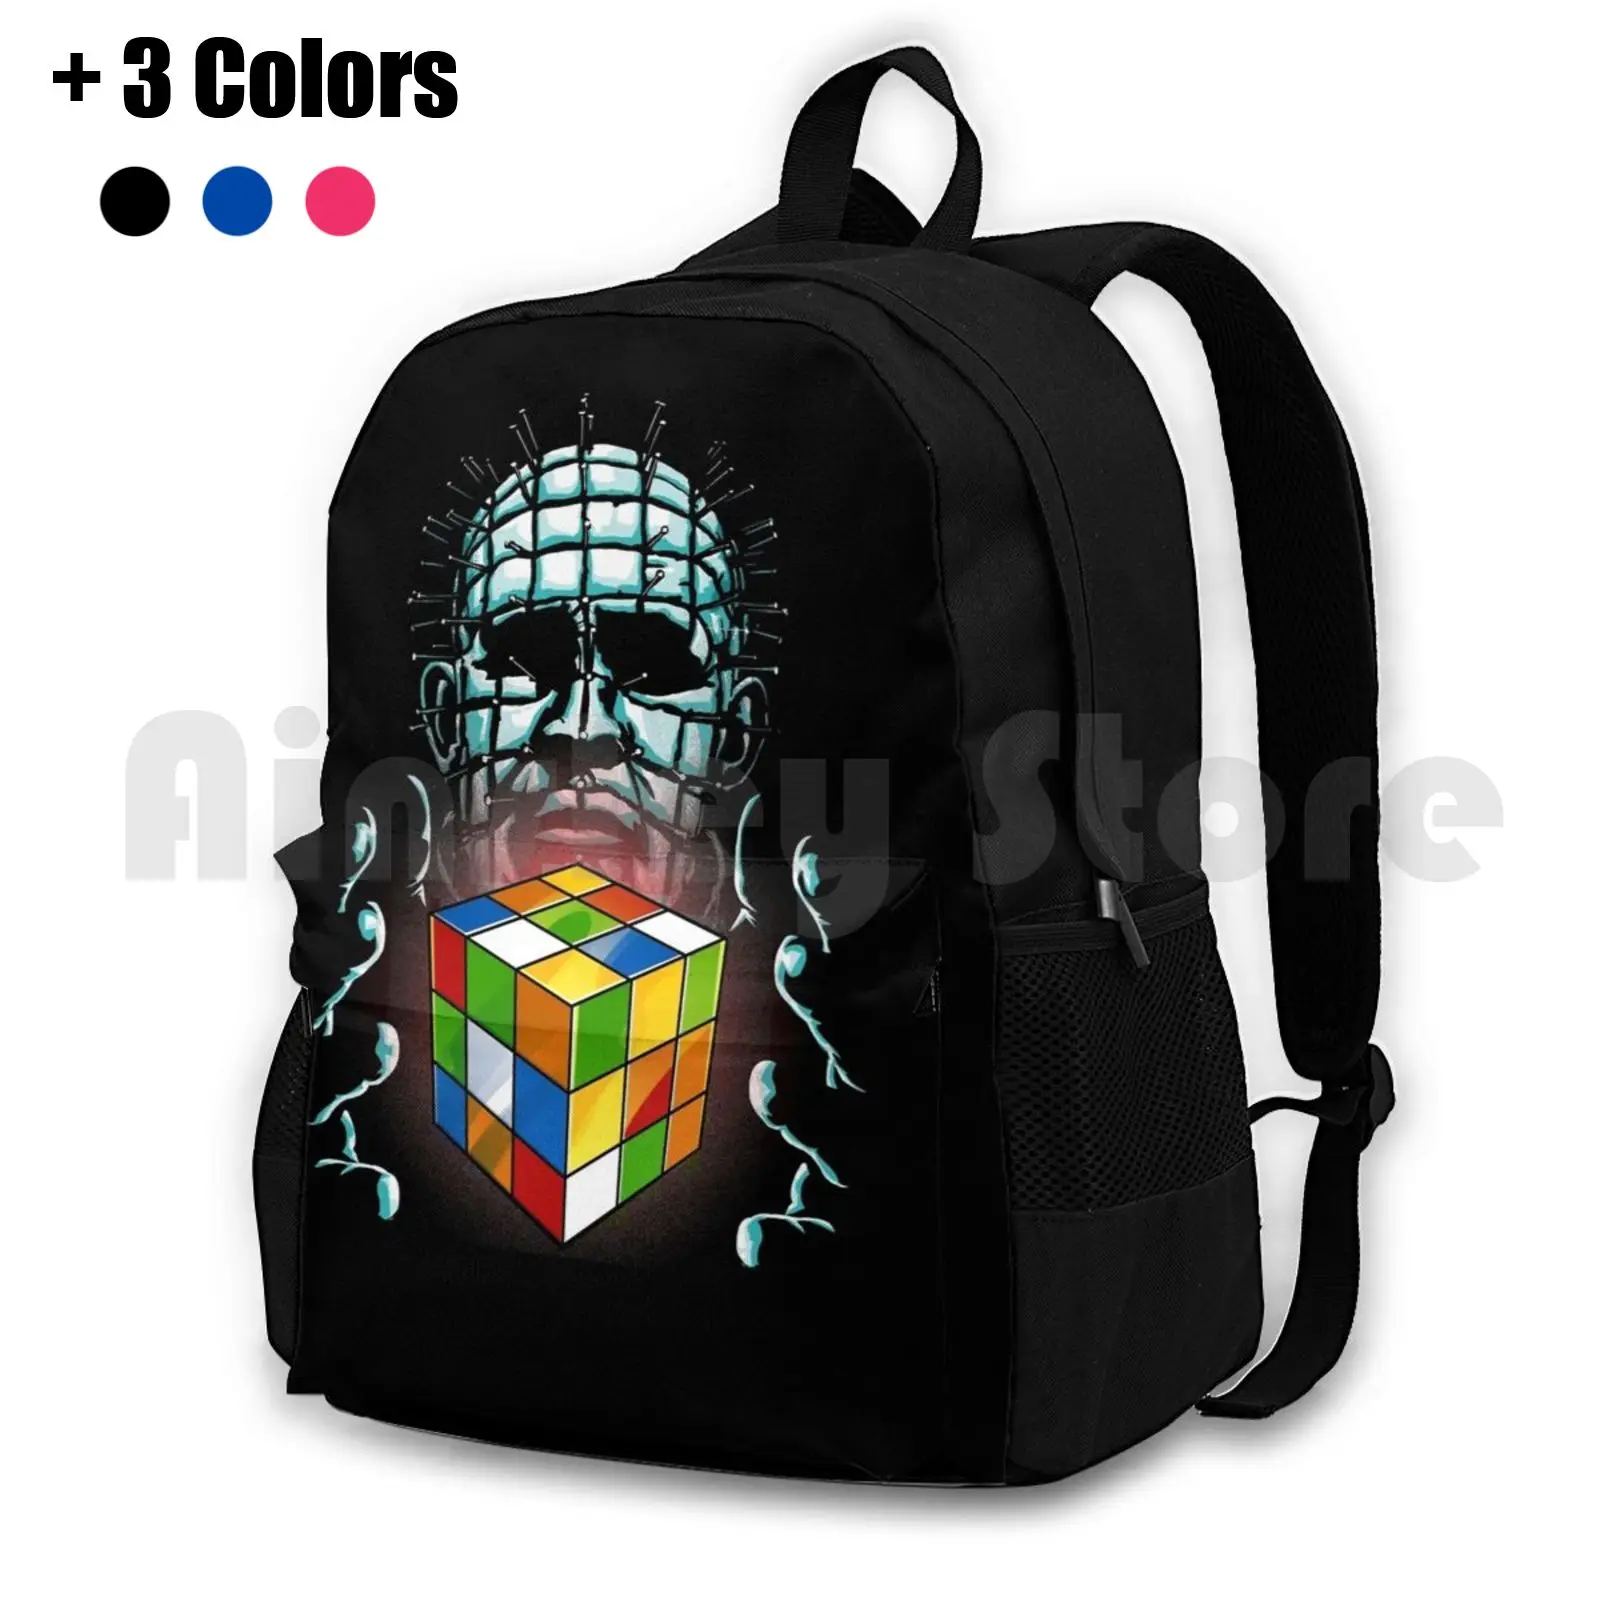 

The Box Outdoor Hiking Backpack Waterproof Camping Travel Hellraiser Pinhead Horror Cub Monsters Classic Horror Movies